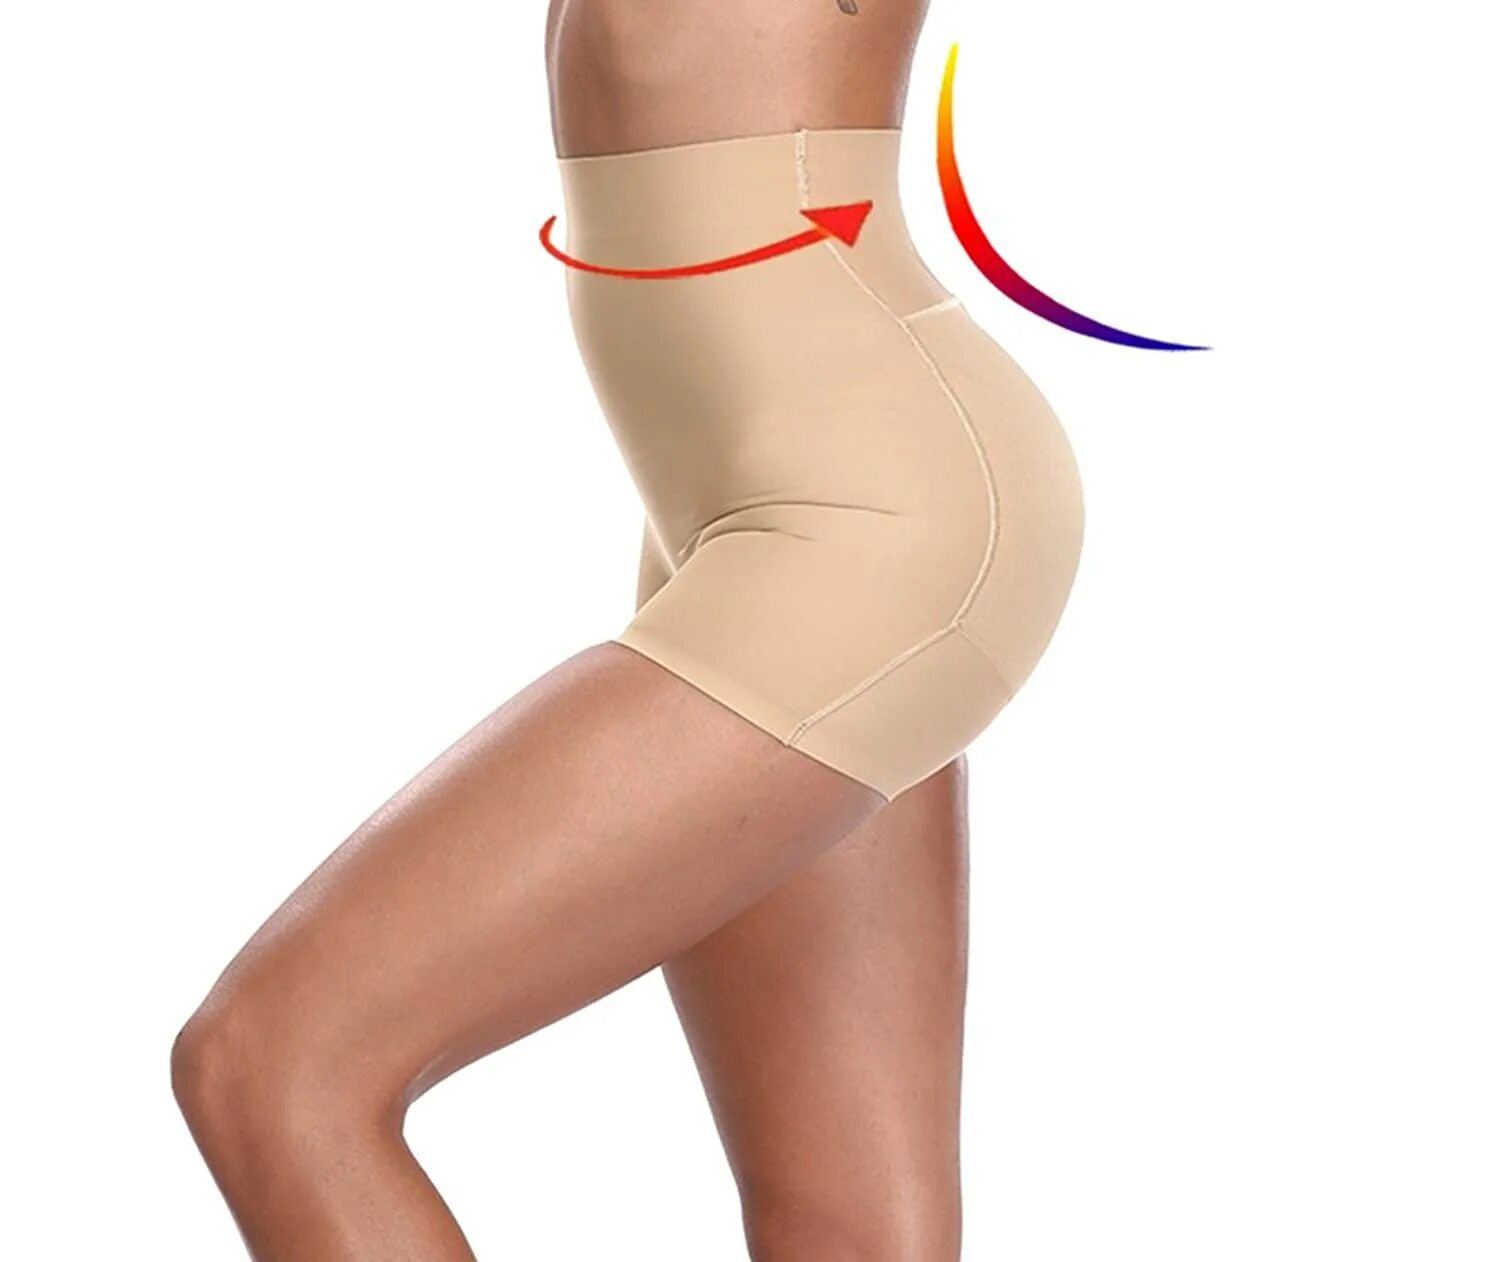 Thigh hip разница. Hip and thigh difference. Shapewear butt difference. Нейлон - 72%, спандекс - 9%, хлопок - 19% трусы.